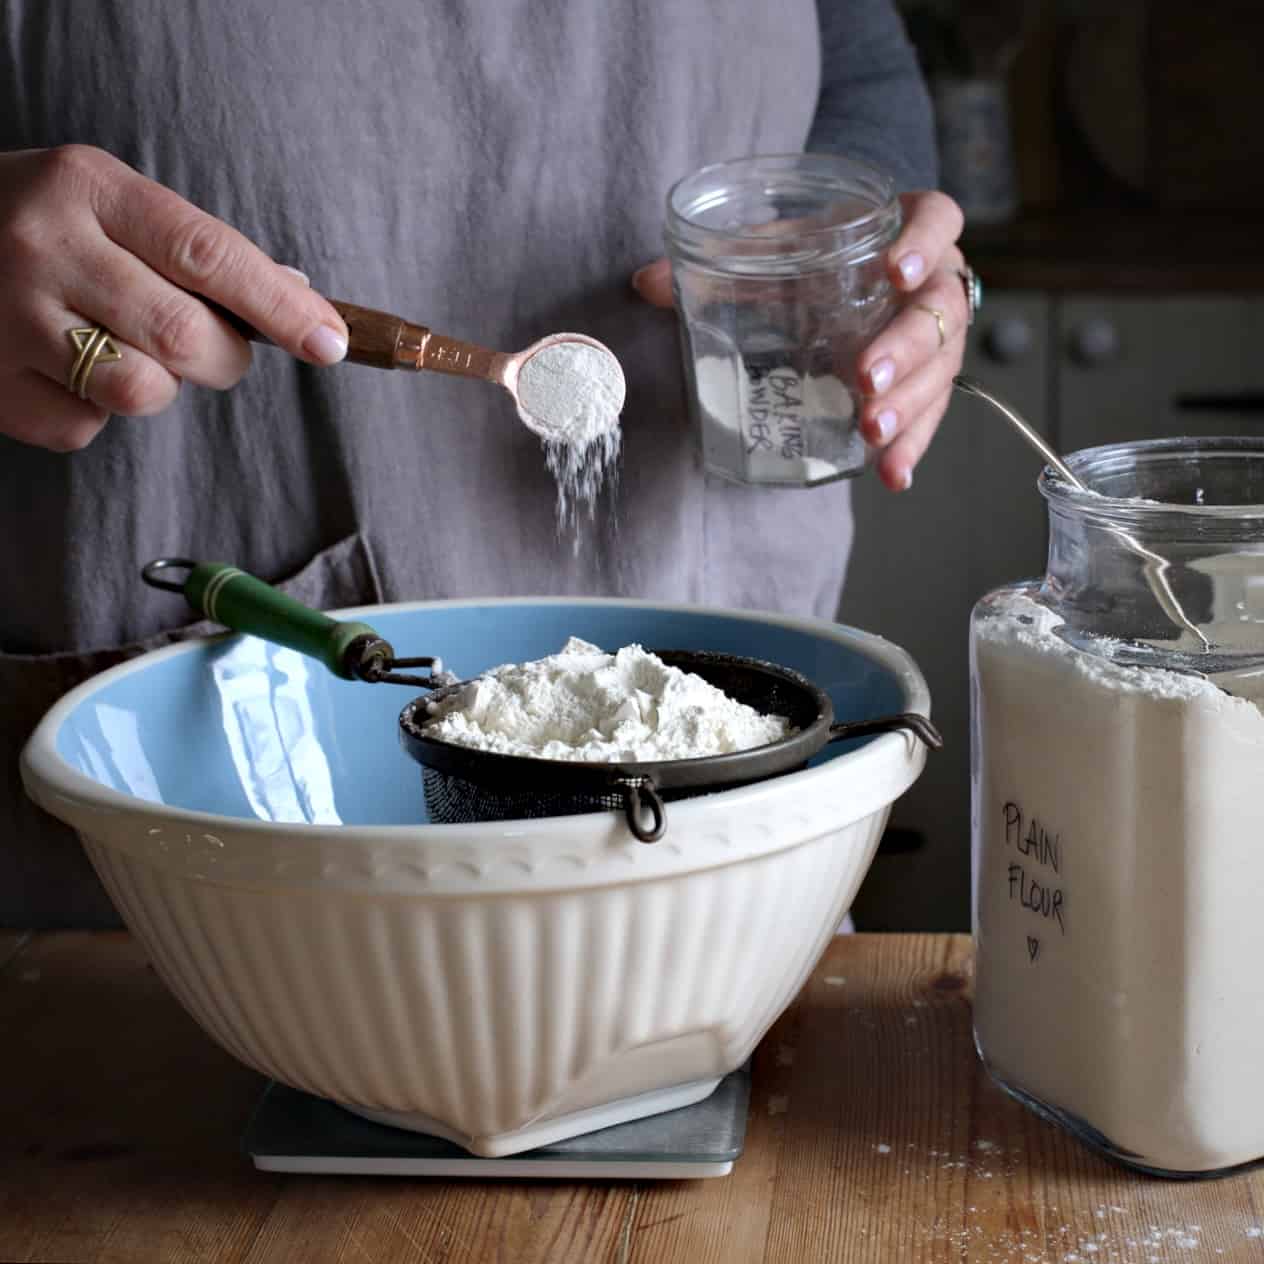 Woman’s hands tipping baking powder into an old fashioned sieve over a mixing bowl from a copper teaspoon